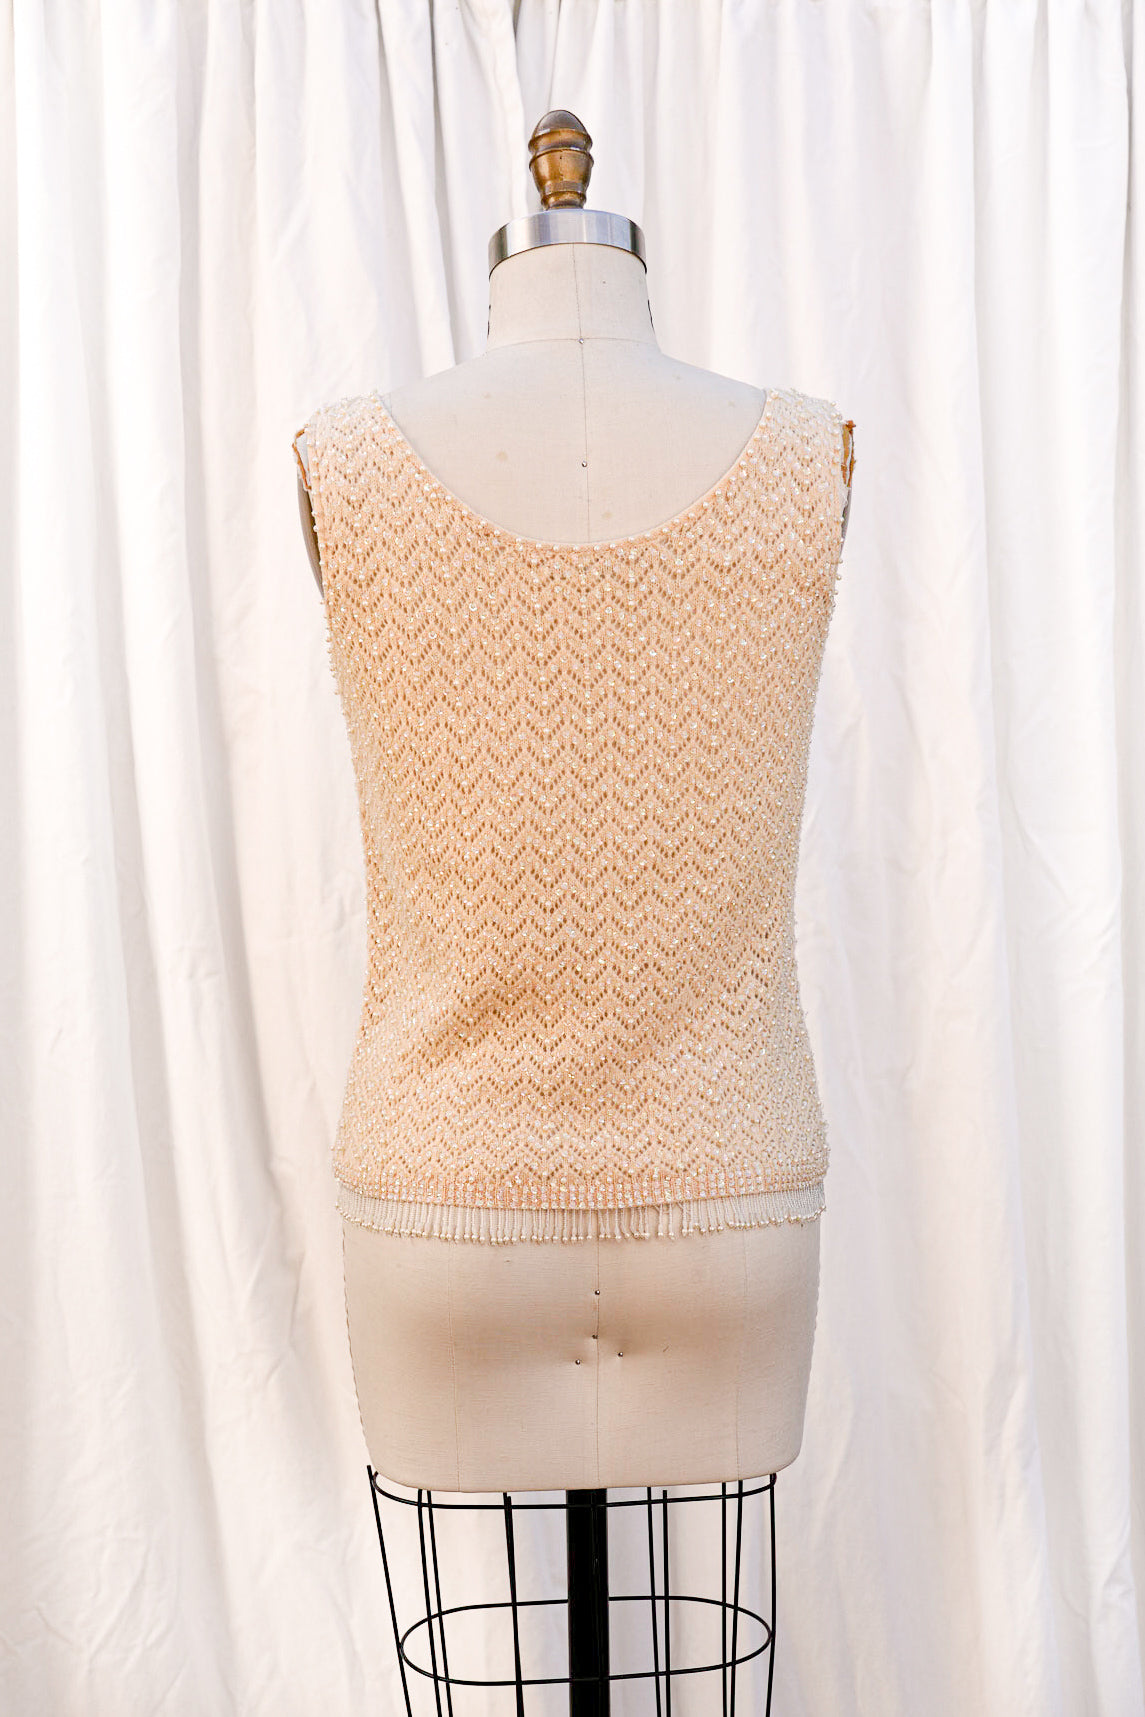 Vintage 1950-1960s Hand Beaded Knit Tank Top